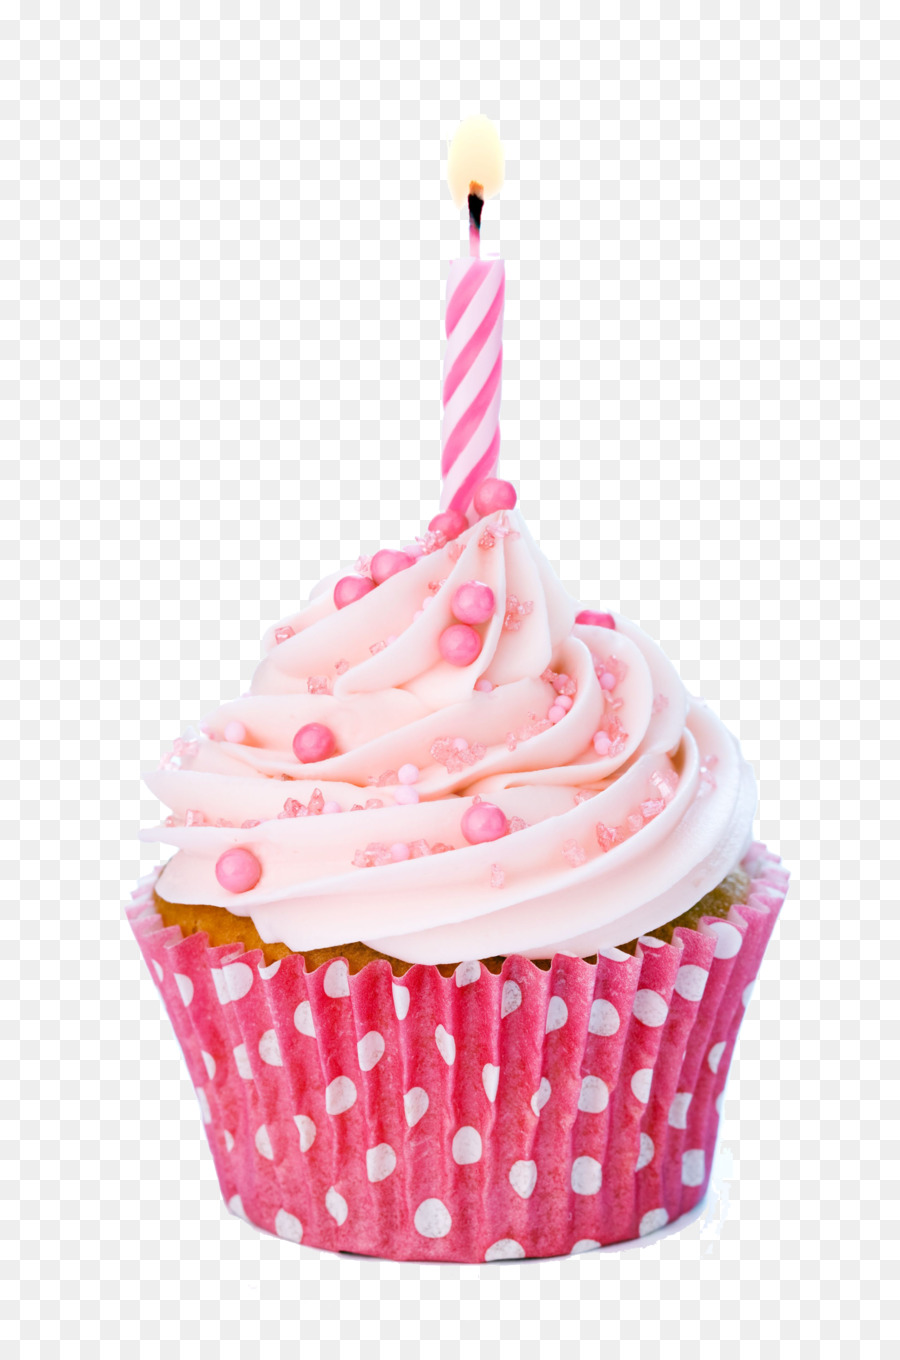 Cupcake Birthday cake Icing Clip art - Vector cake candle png download - 2848*4272 - Free Transparent Cupcake png Download.